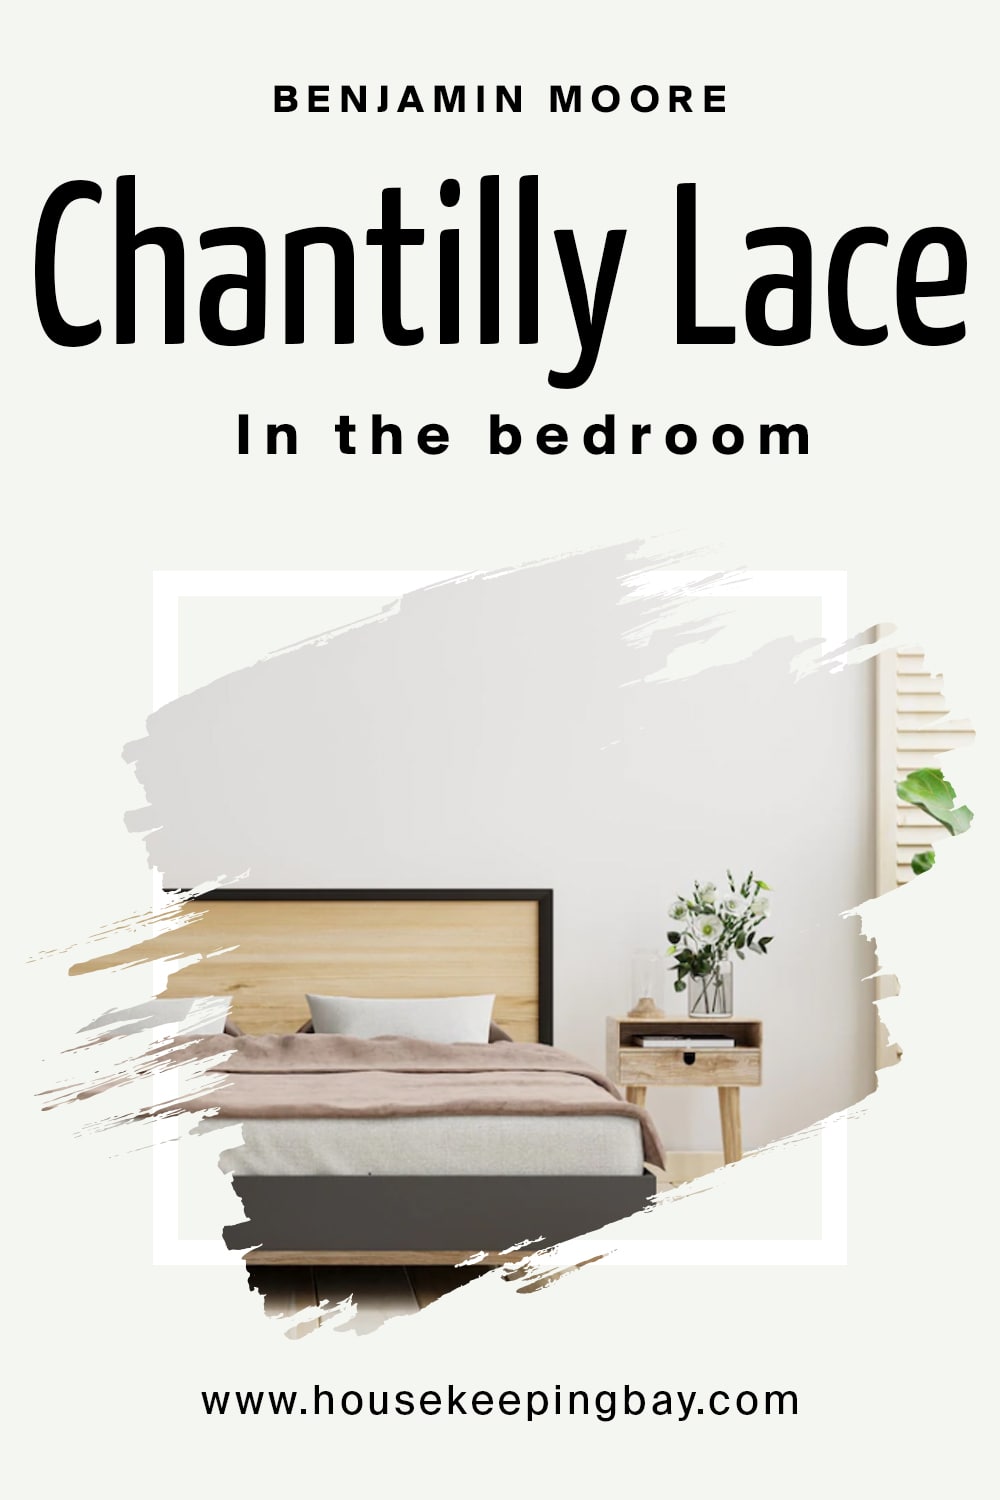 Benjamin Moore.Chantilly Lace For the bedroom